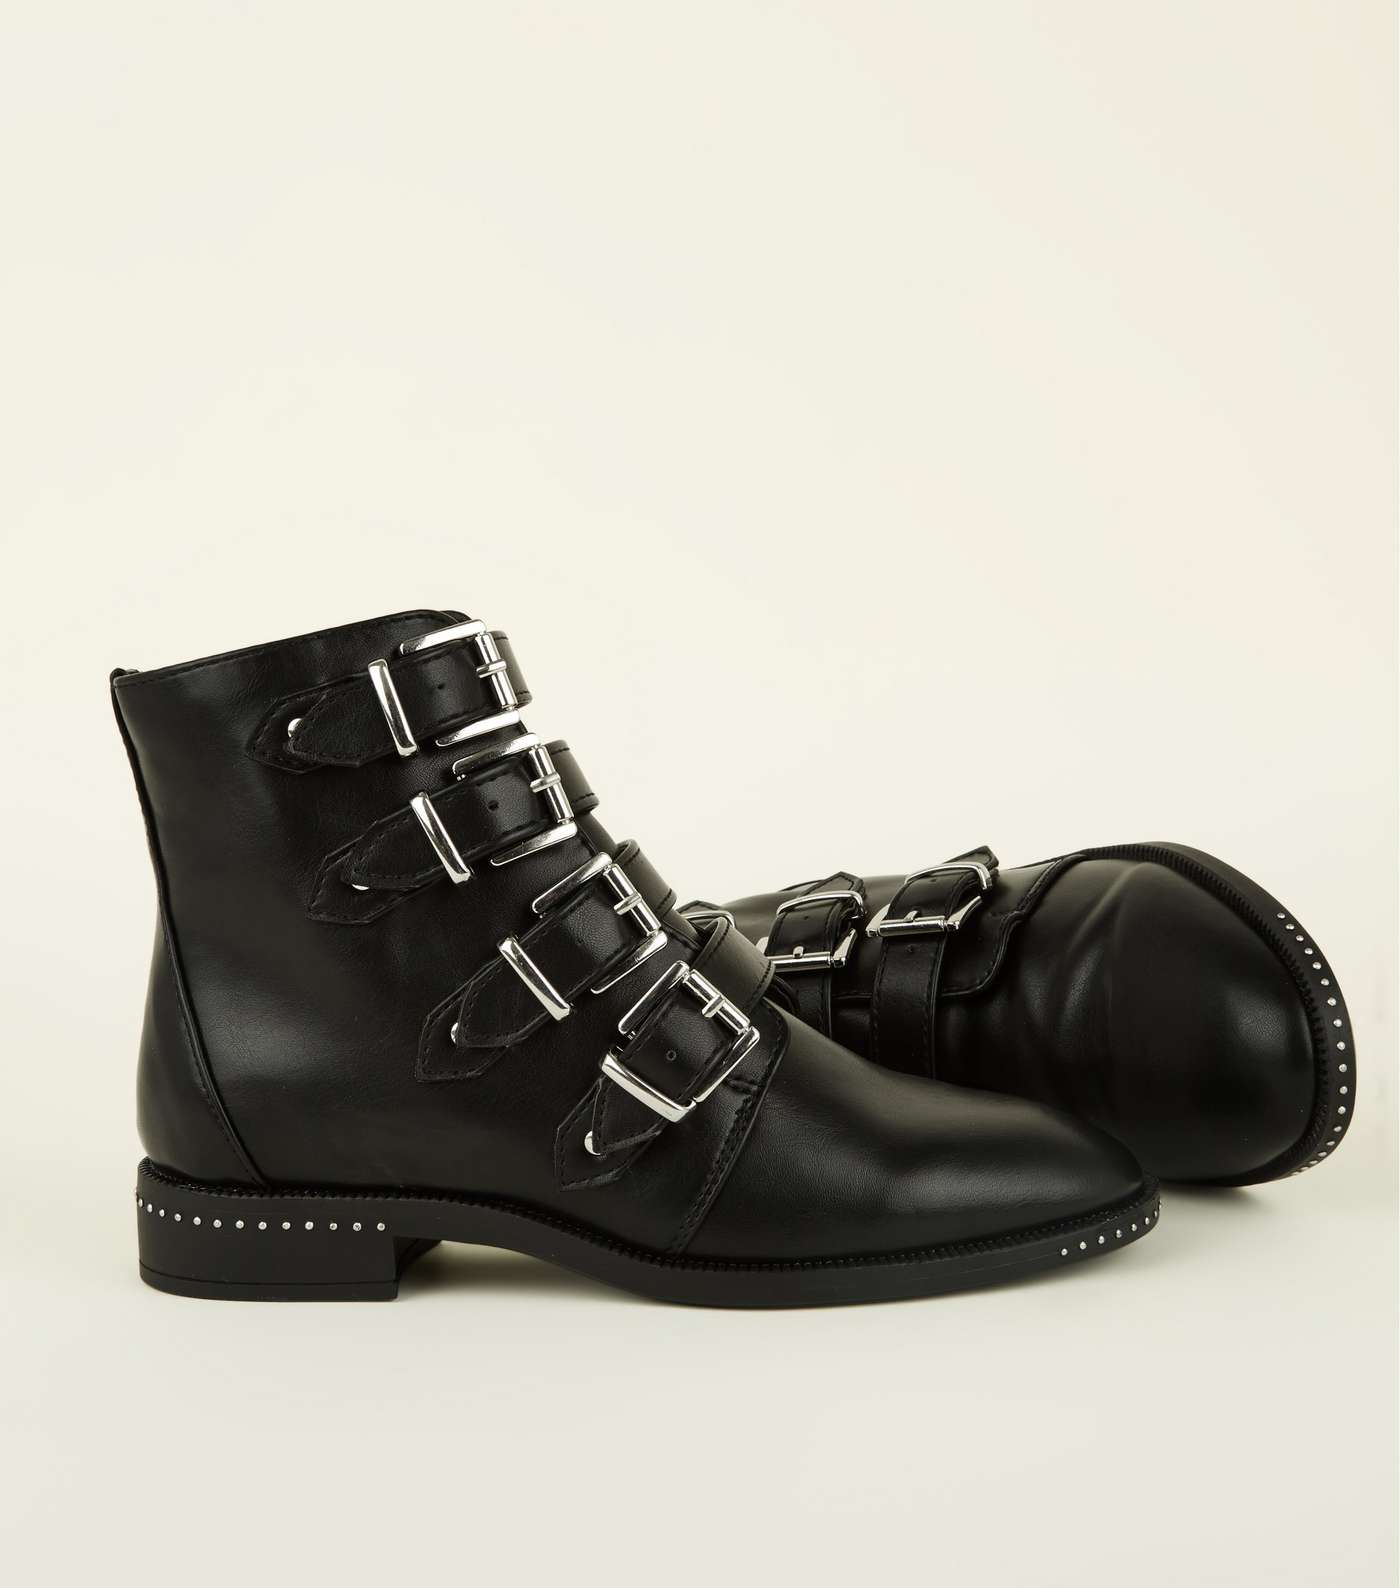 Girls Black Buckle Strap Studded Ankle Boots Image 3